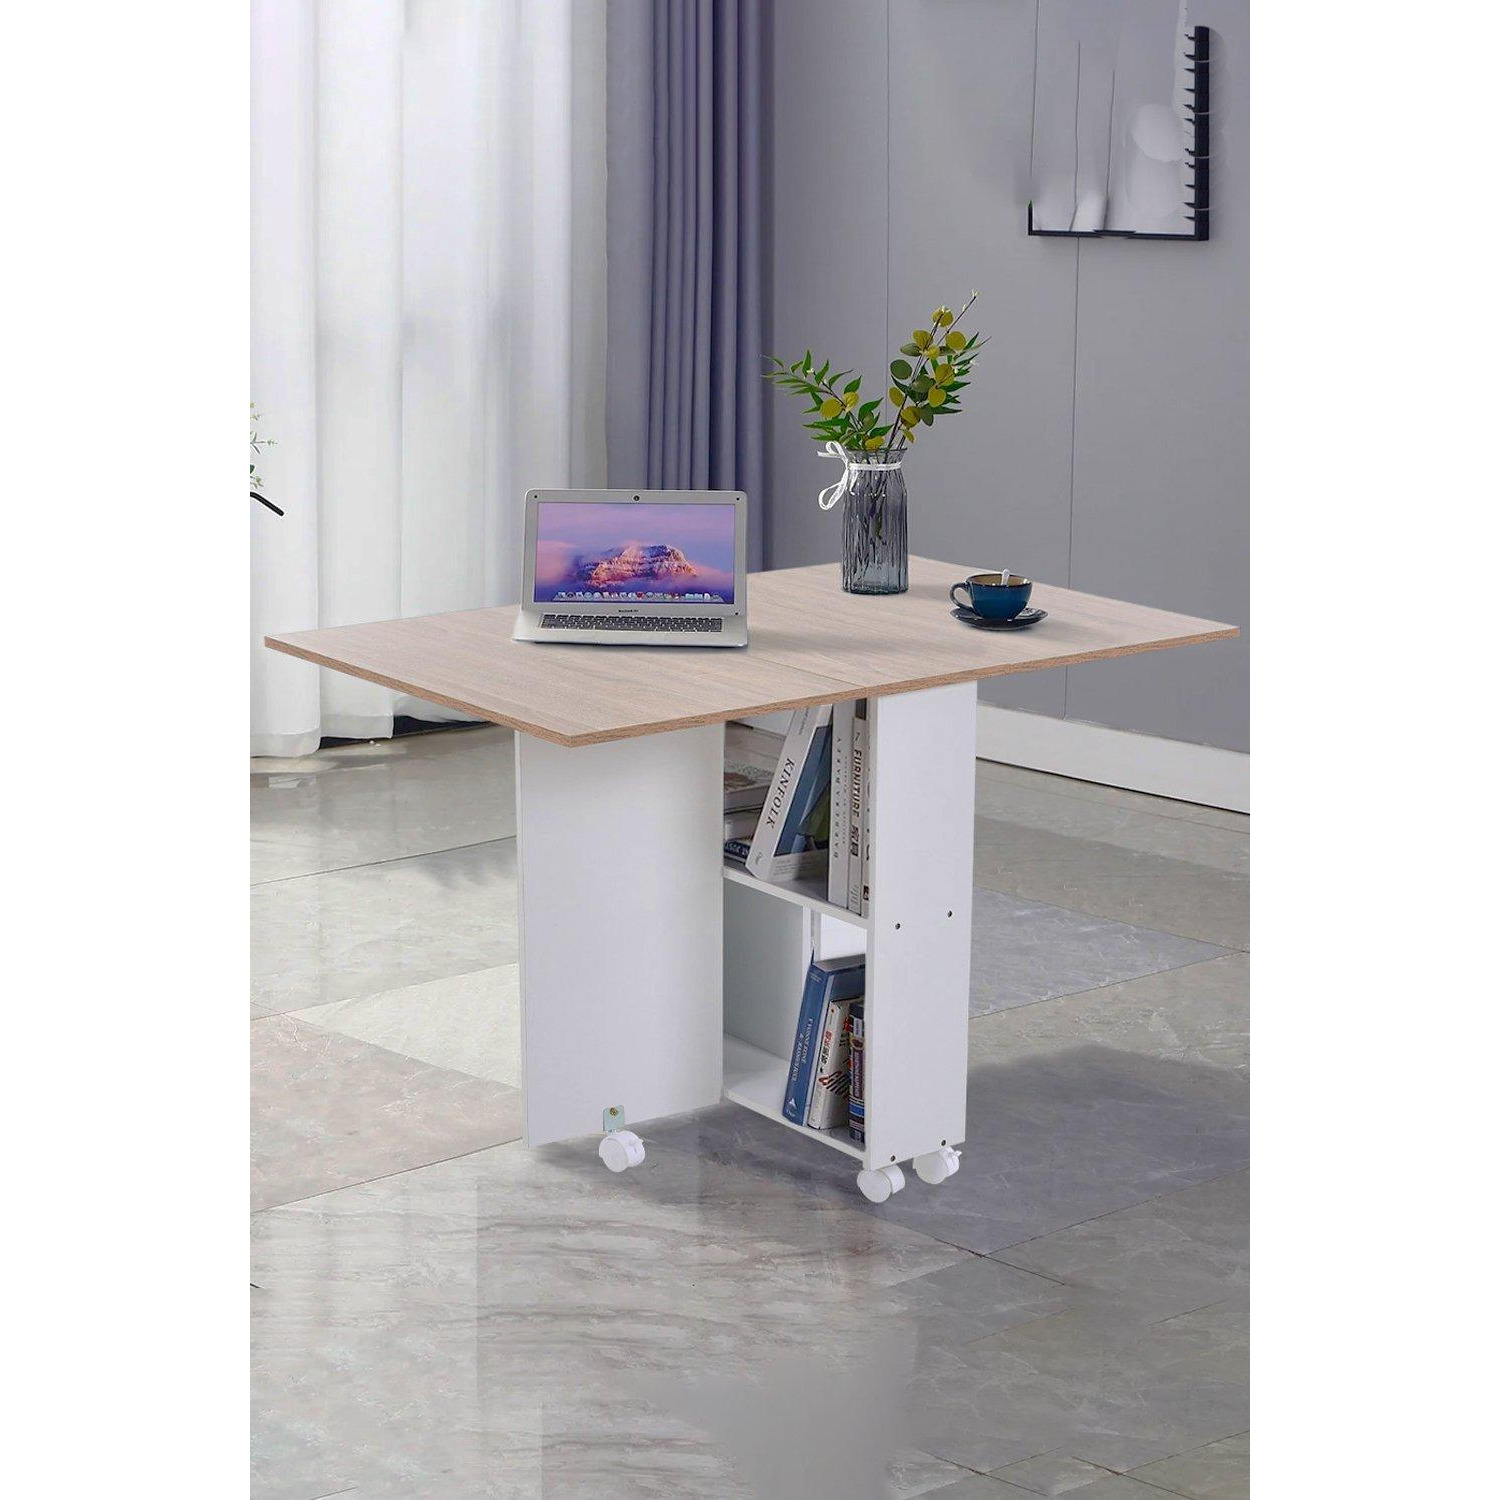 Multipurpose Folding Dining Table with 2 Drawers - image 1